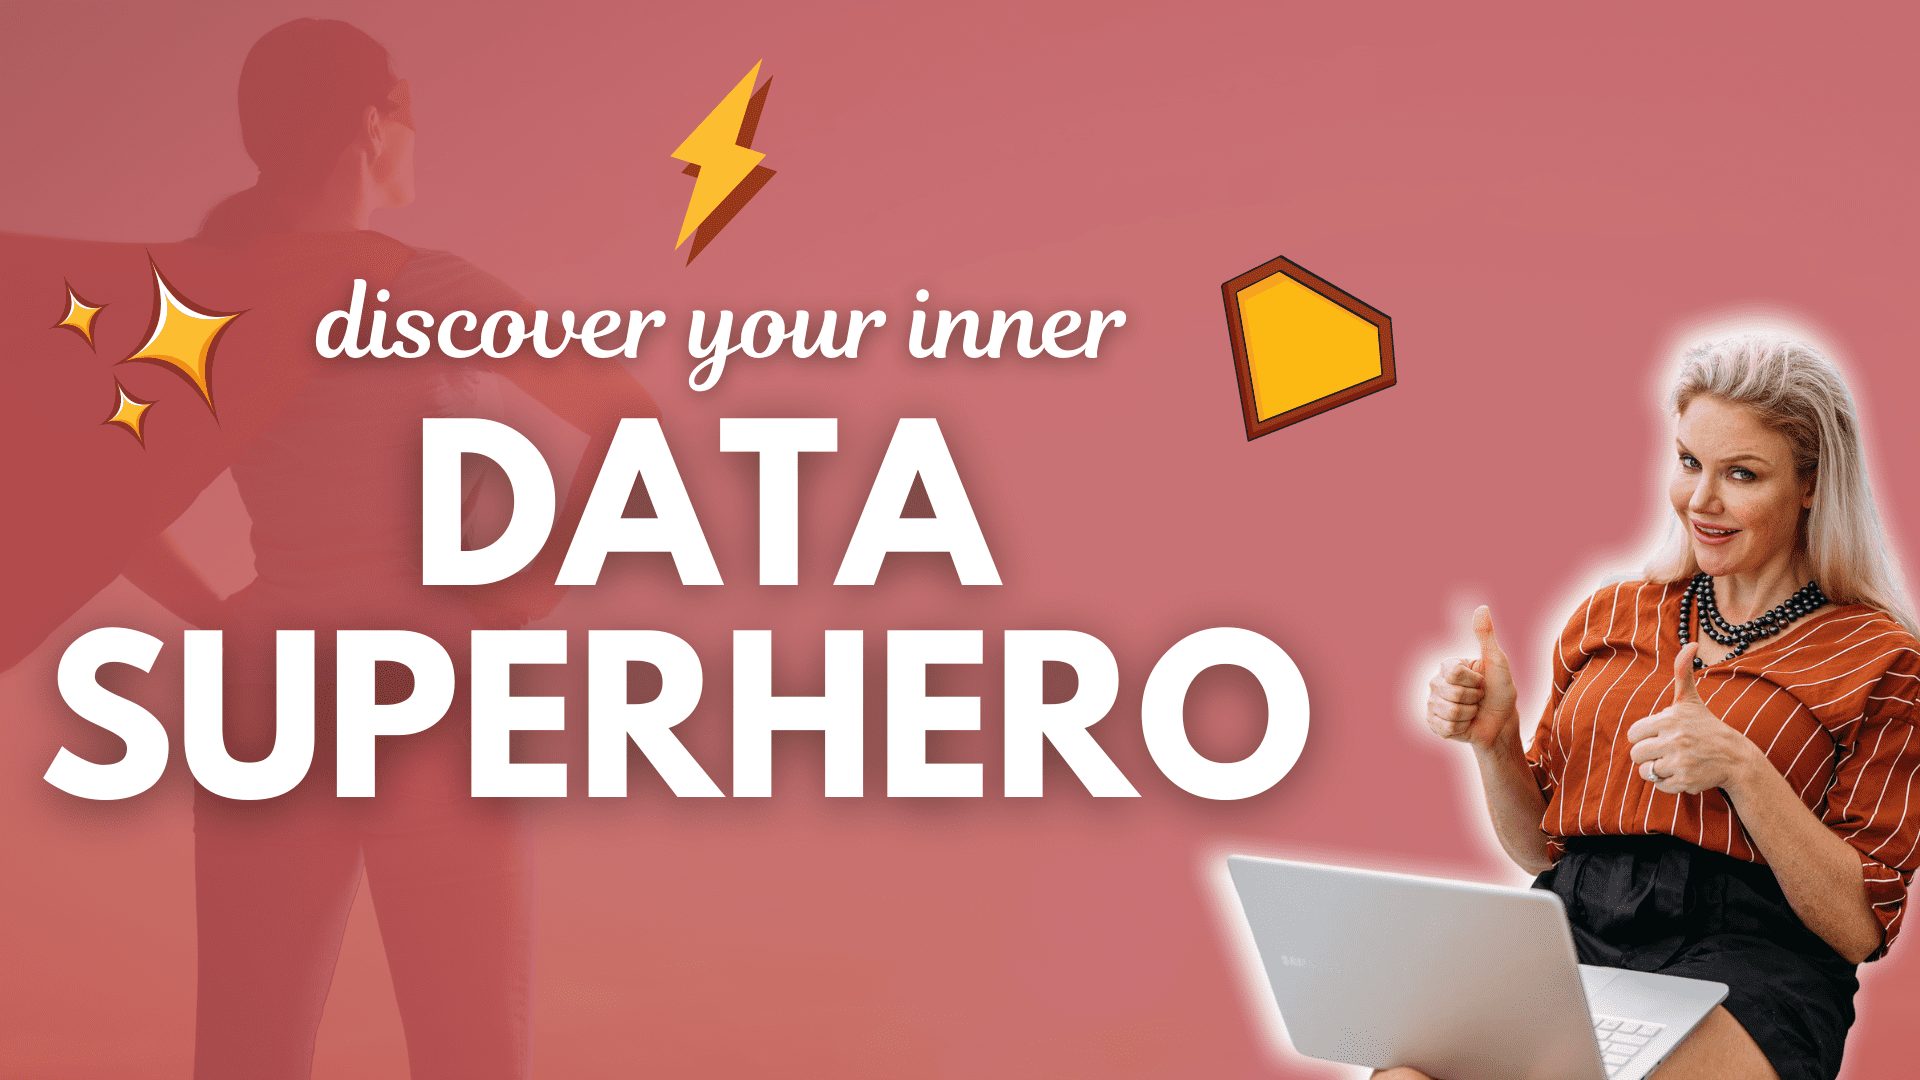 Discover your inner data superhero and the data career that's right for you